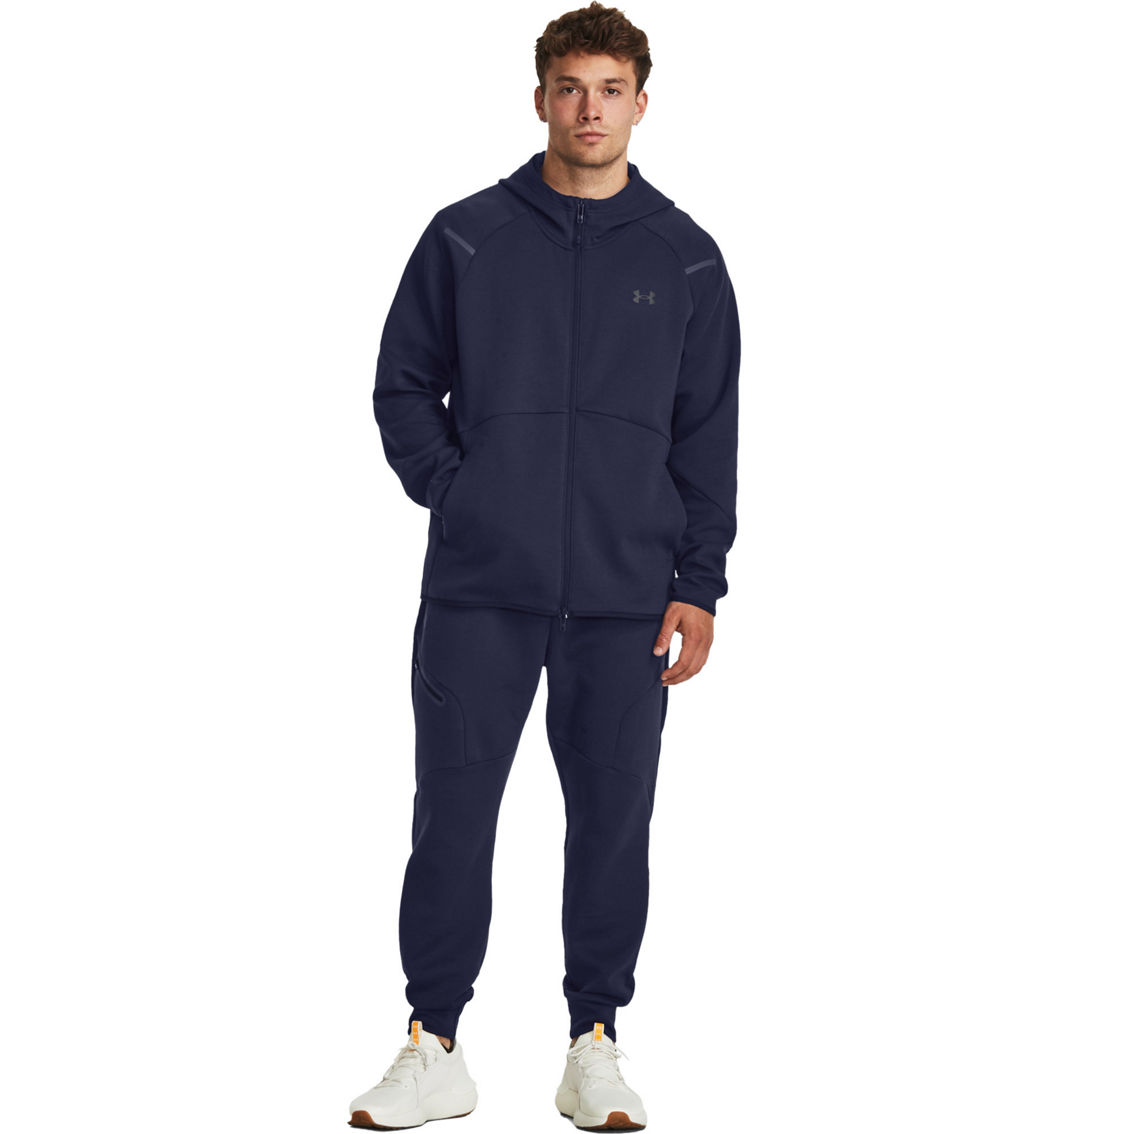 Under Armour Unstoppable Fleece Full Zip - Image 3 of 6